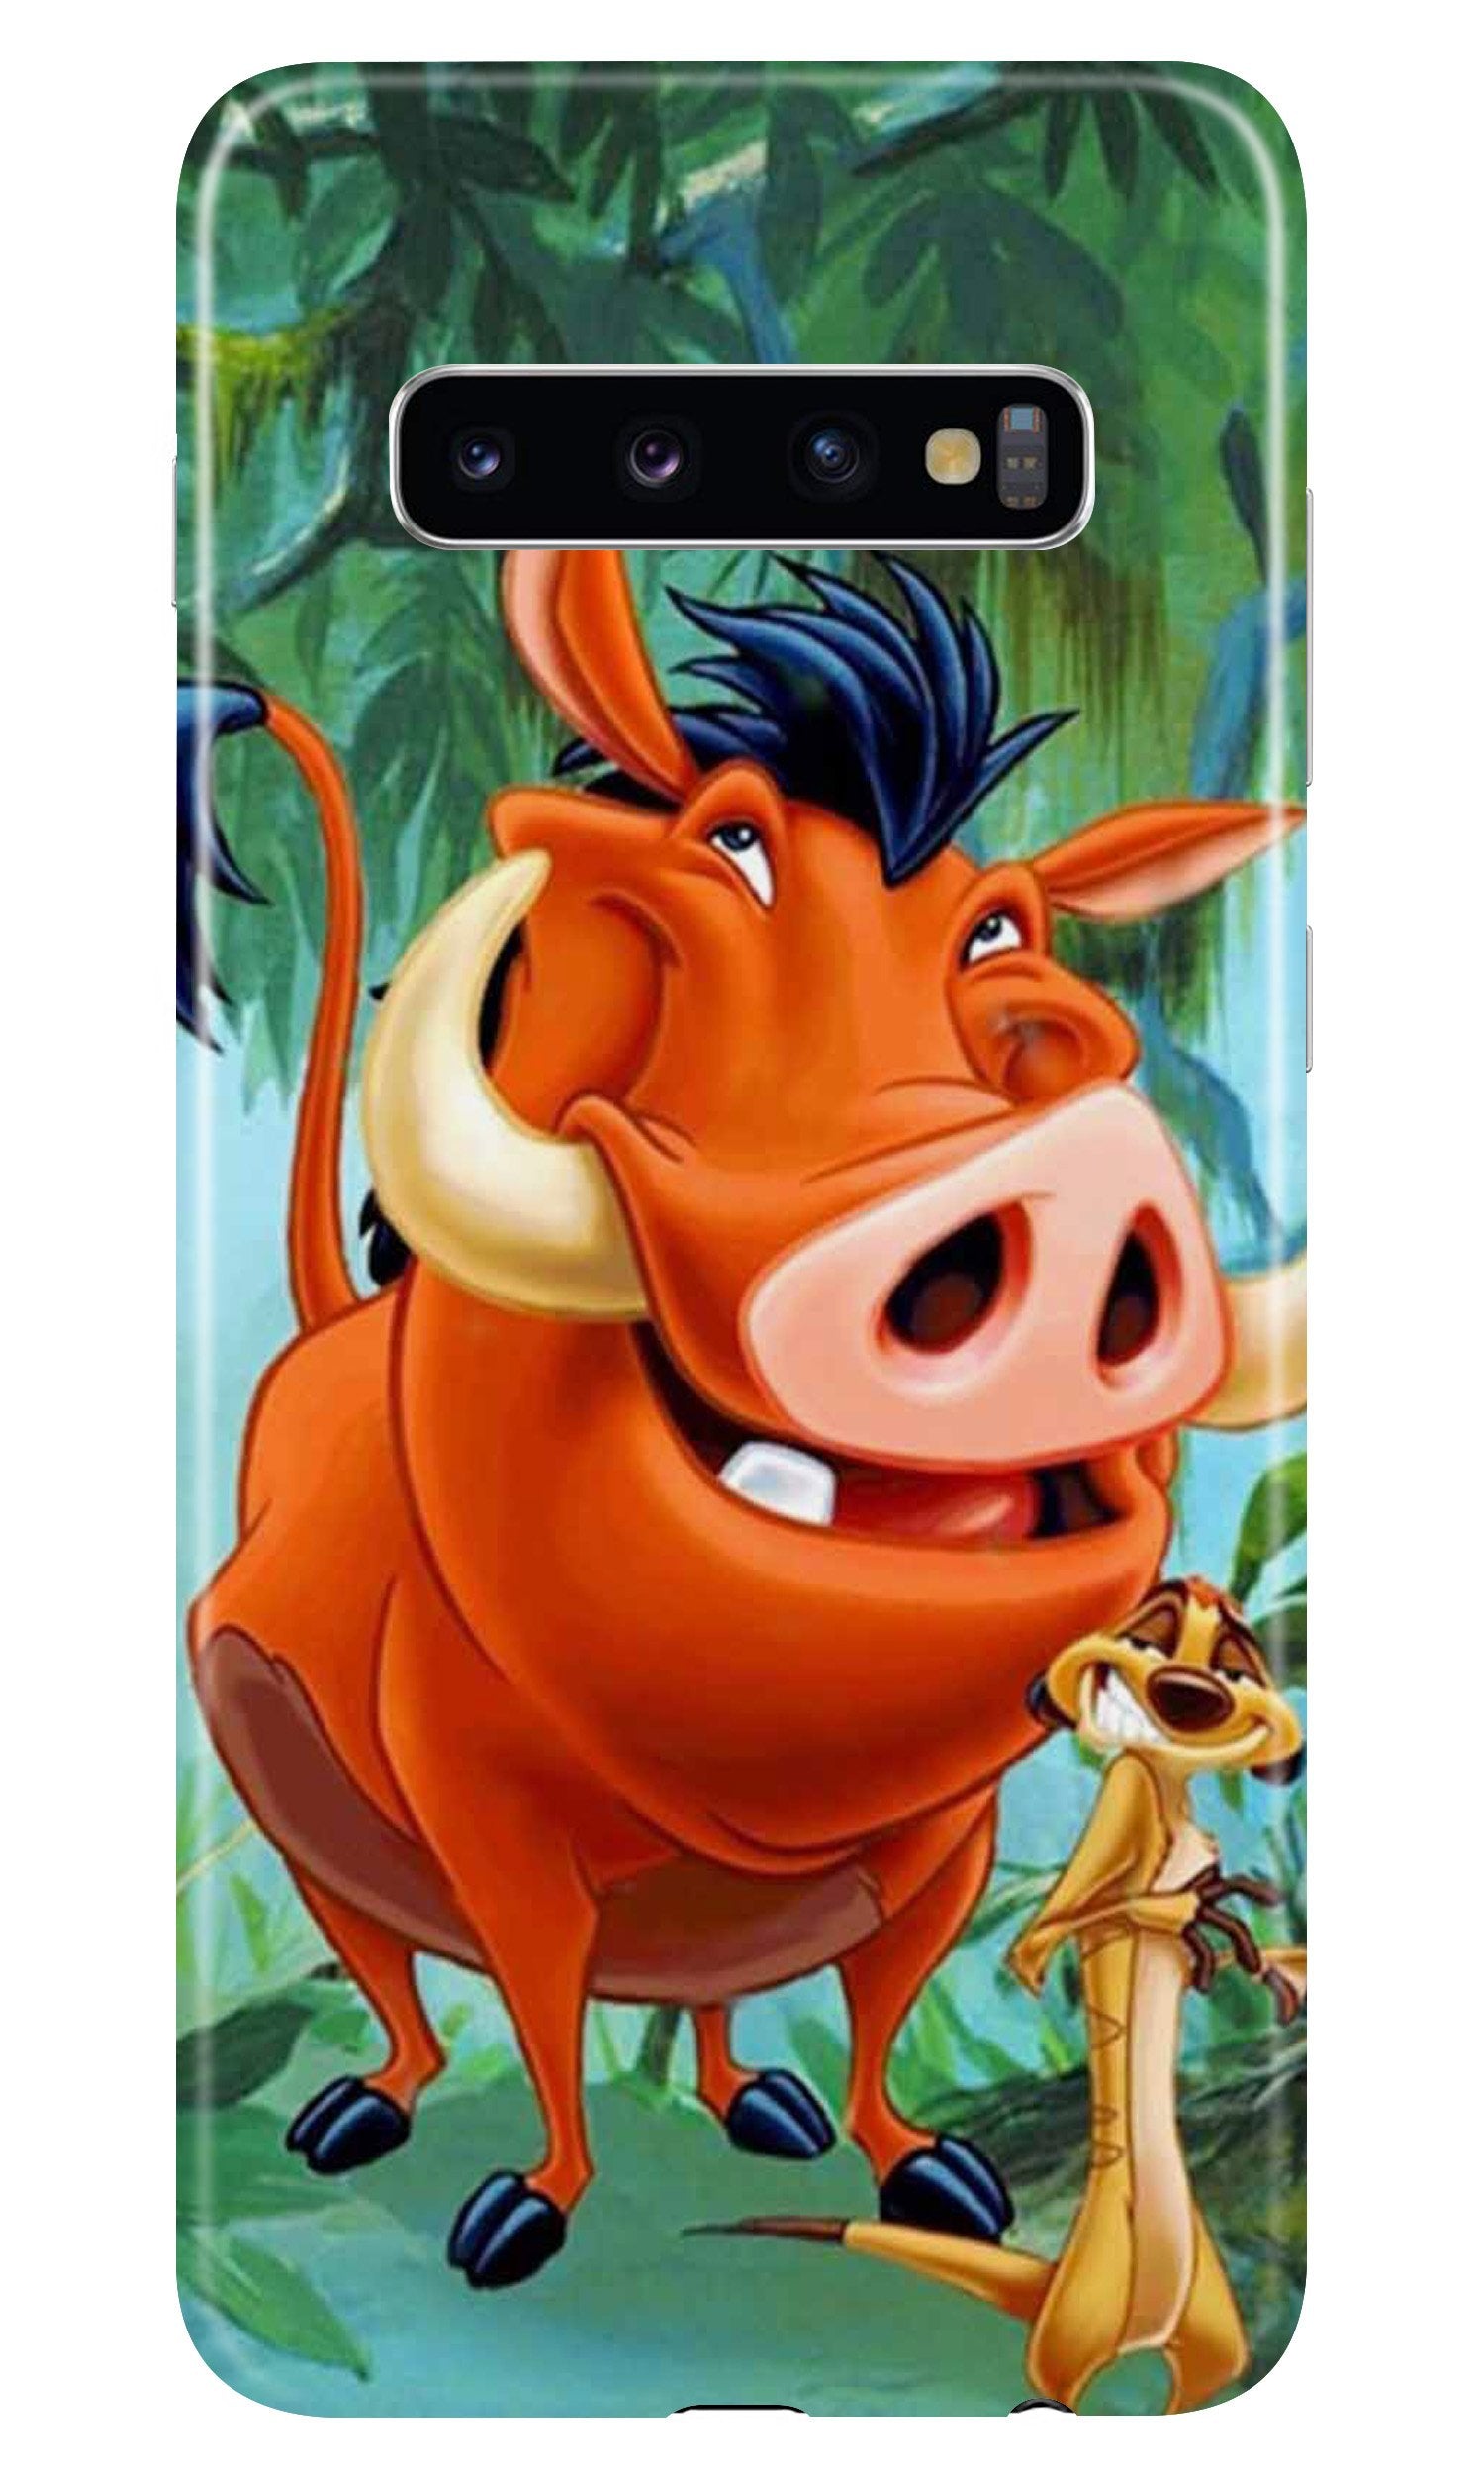 Timon and Pumbaa Mobile Back Case for Samsung Galaxy S10  (Design - 305)